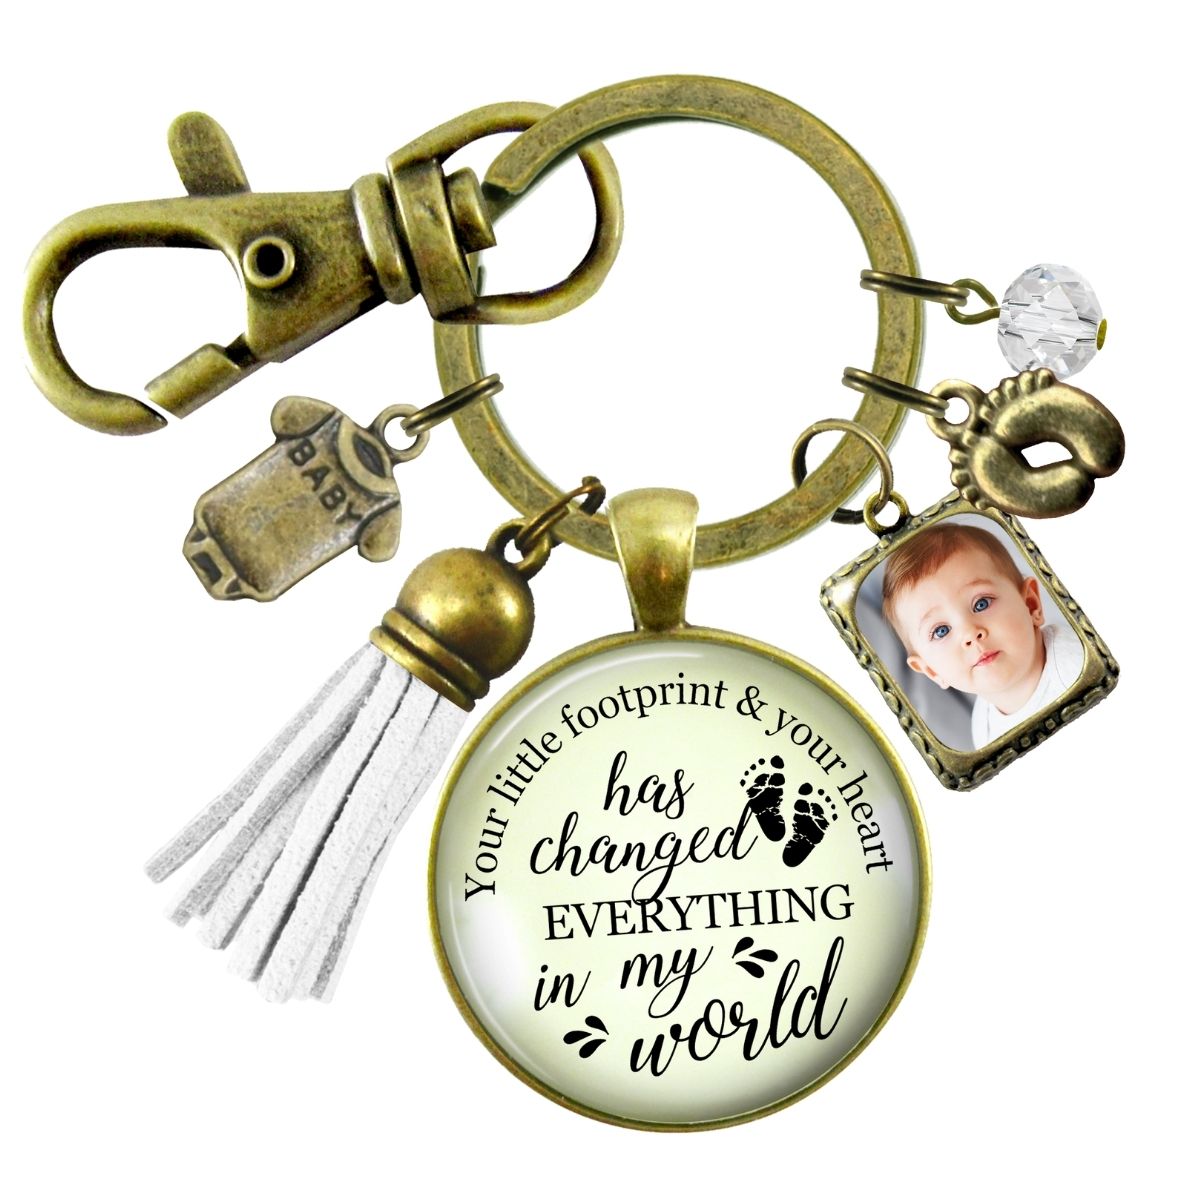 Handmade Gutsy Goodness Jewelry New Mom Keychain Your Little Footprint Gift Baby Feet, Photo Frame Charm, DIY Picture Template